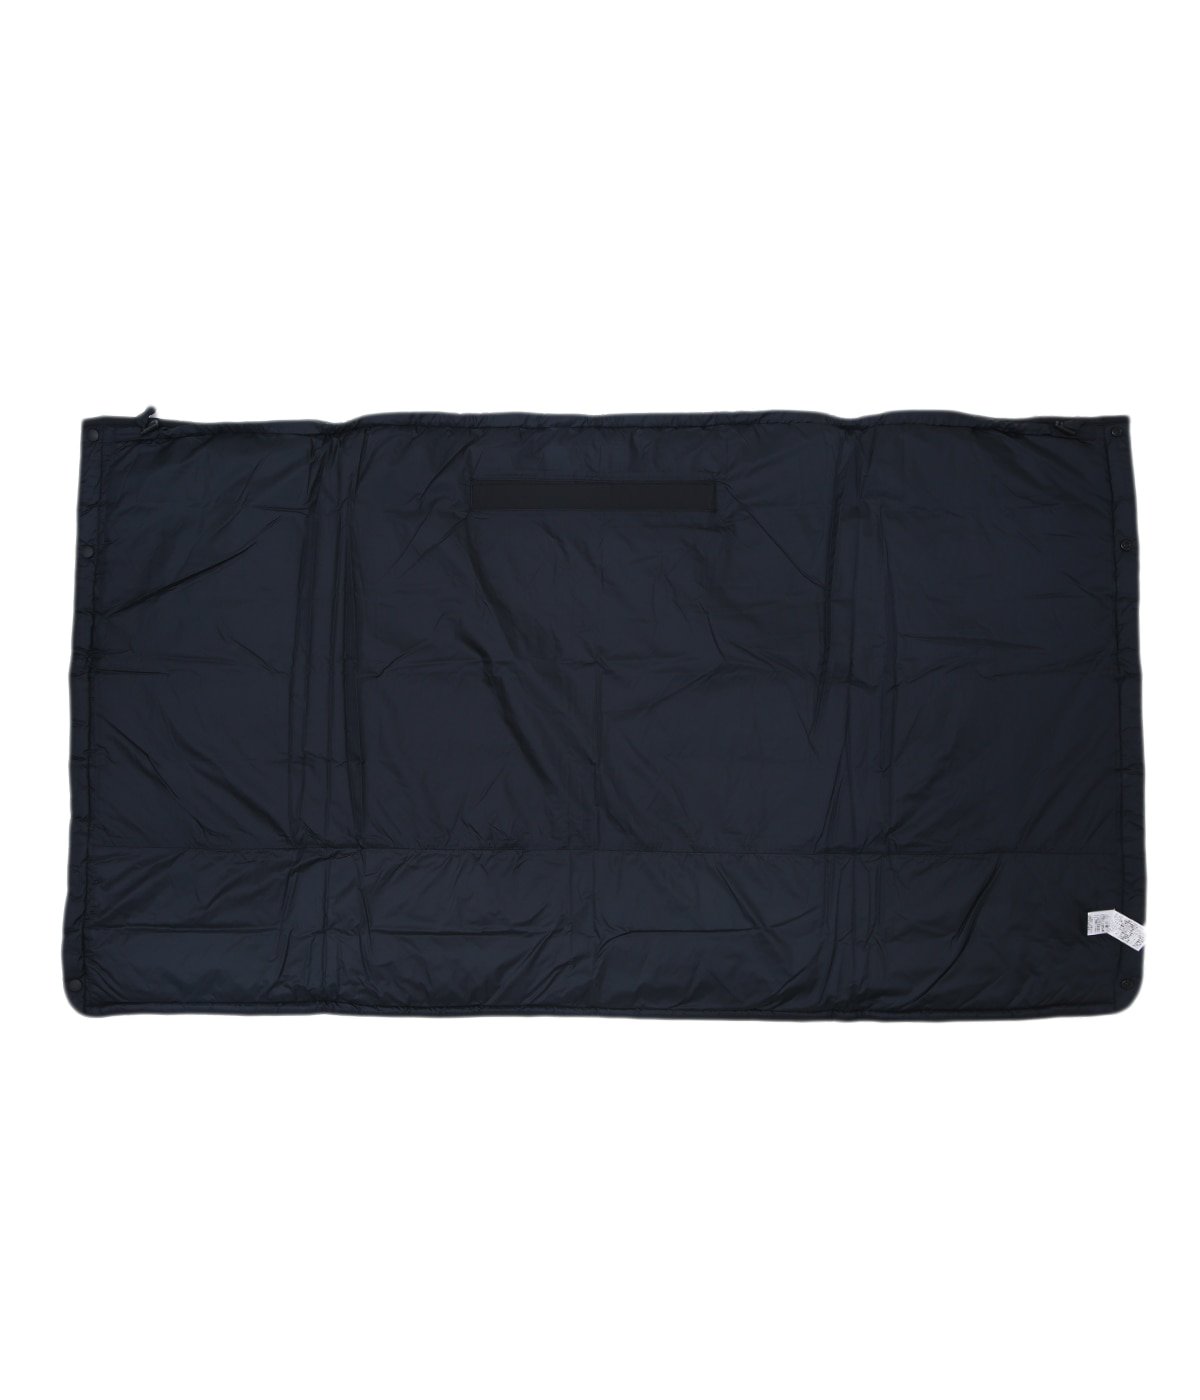 THE NORTH FACE(ザ ノースフェイス) Kids' Starry Shell Blanket 